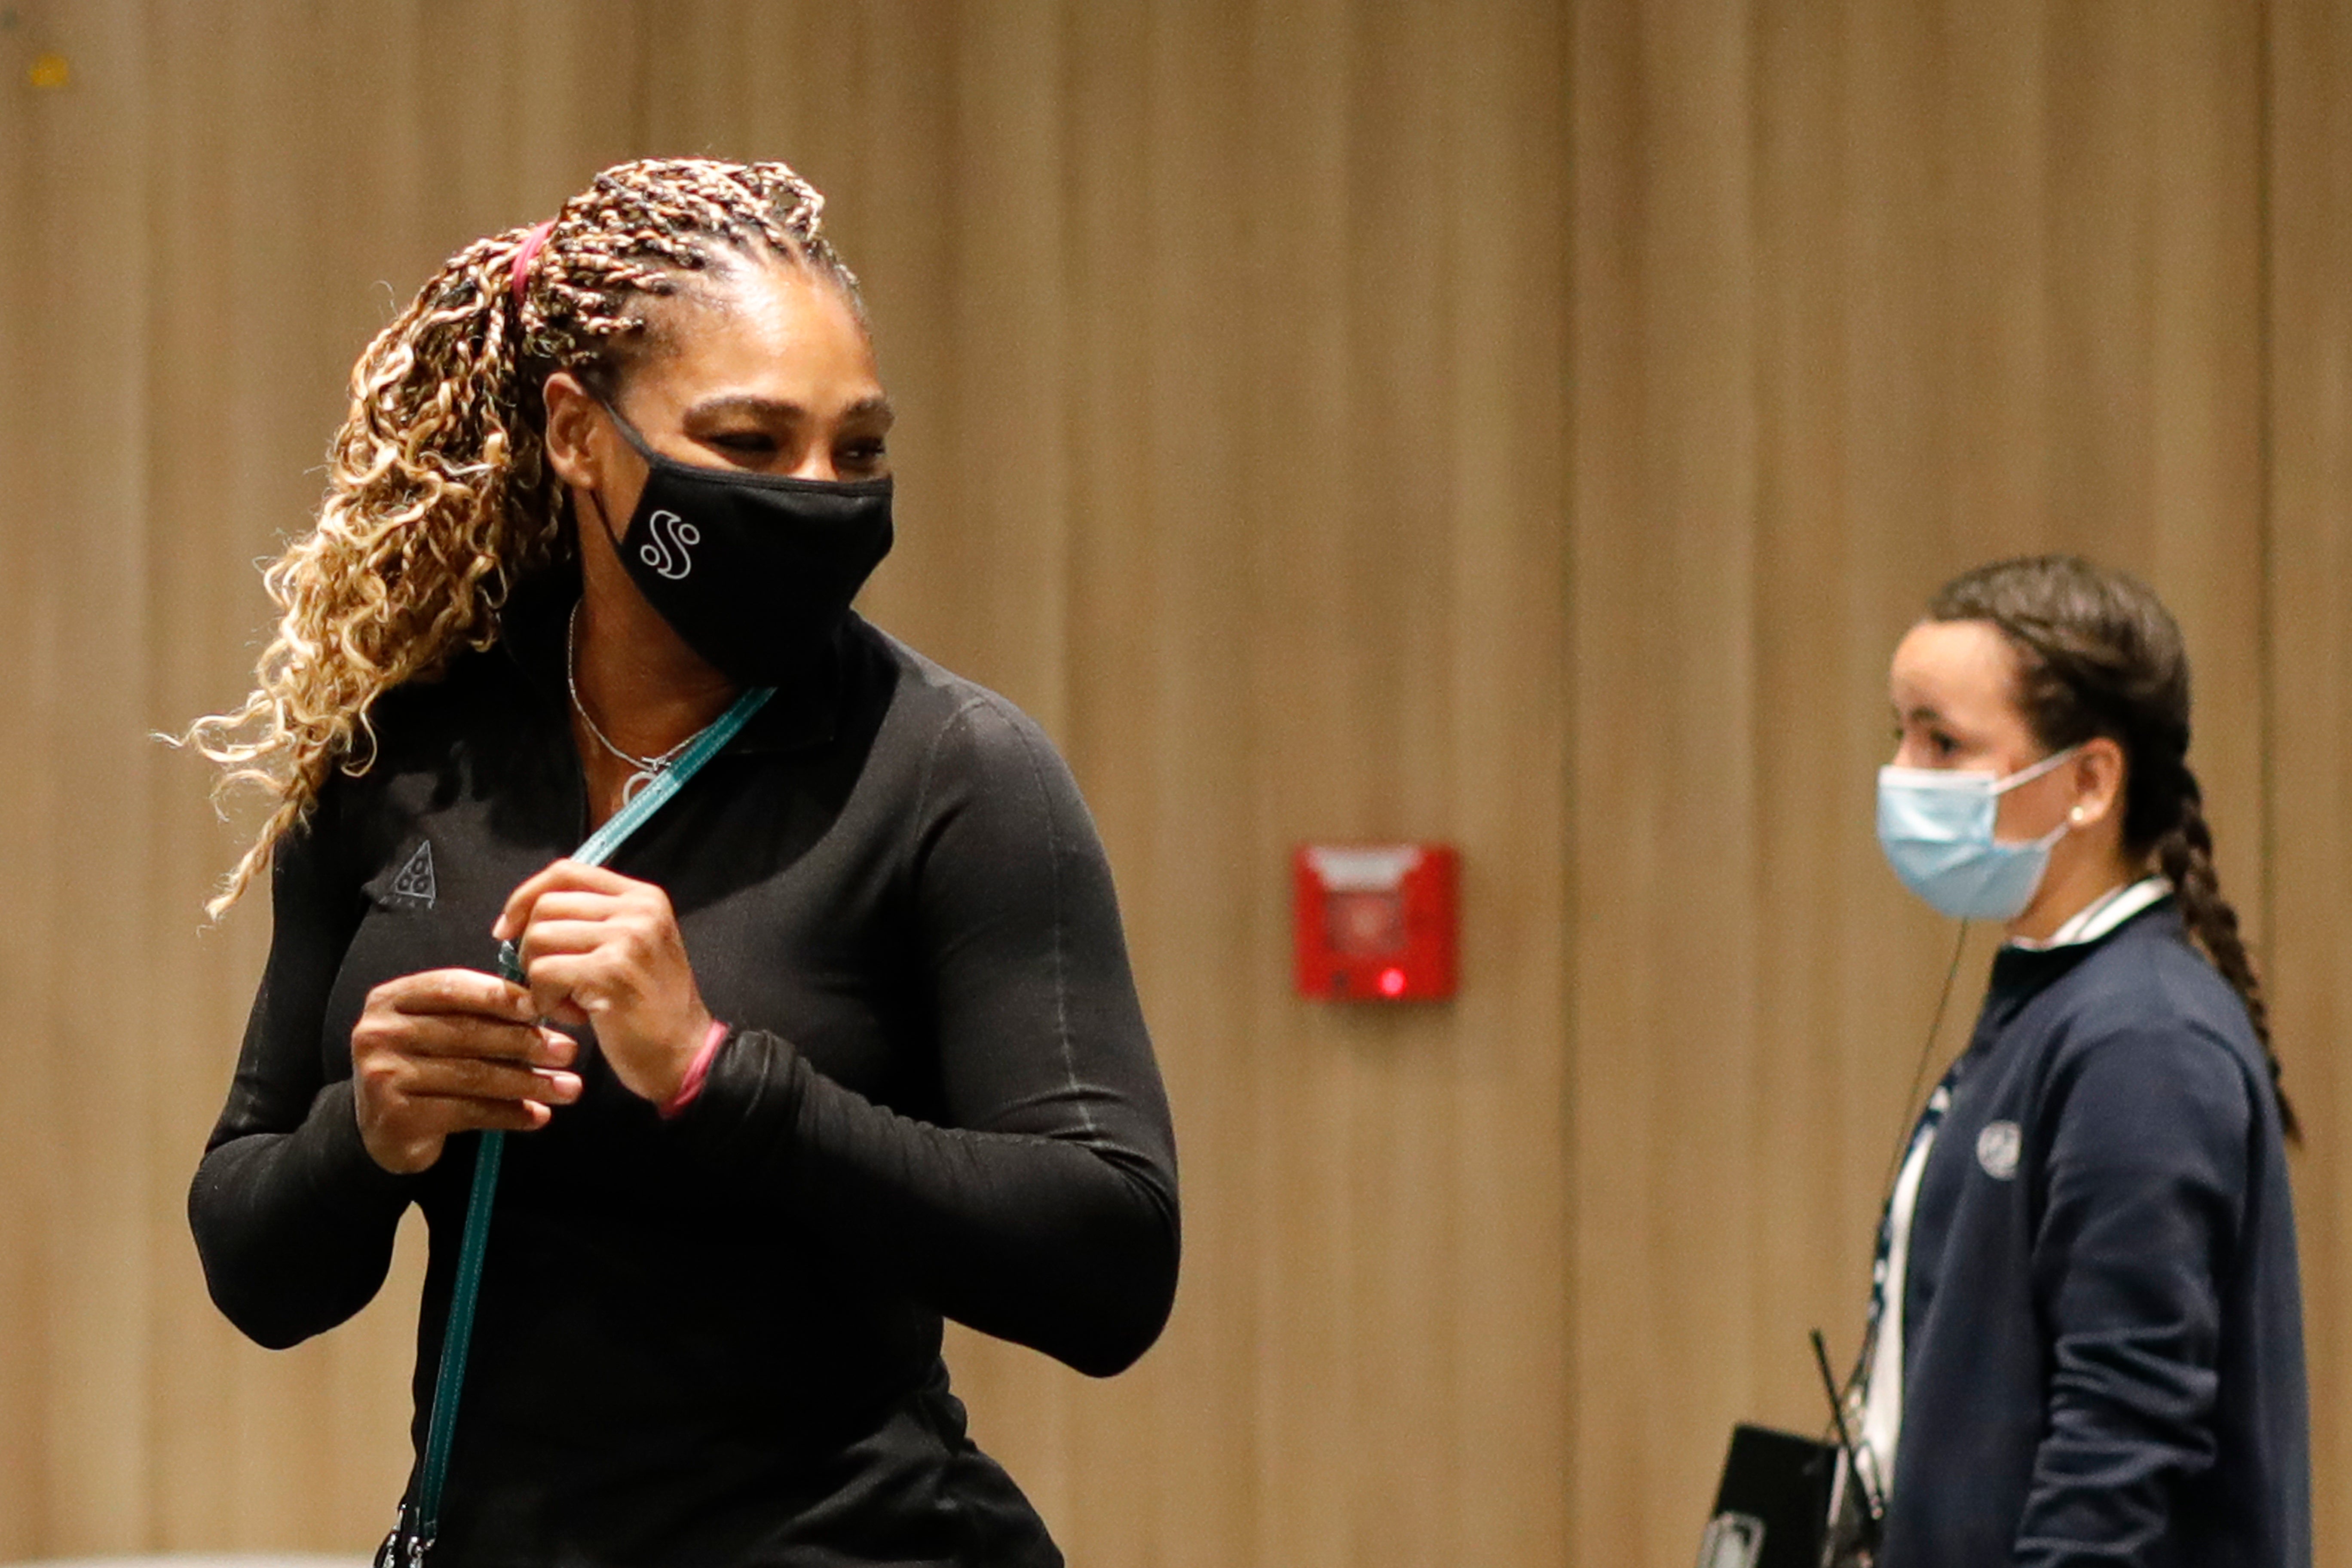 serena-williams-withdraws-from-french-open-before-second-round-match-due-to-injury